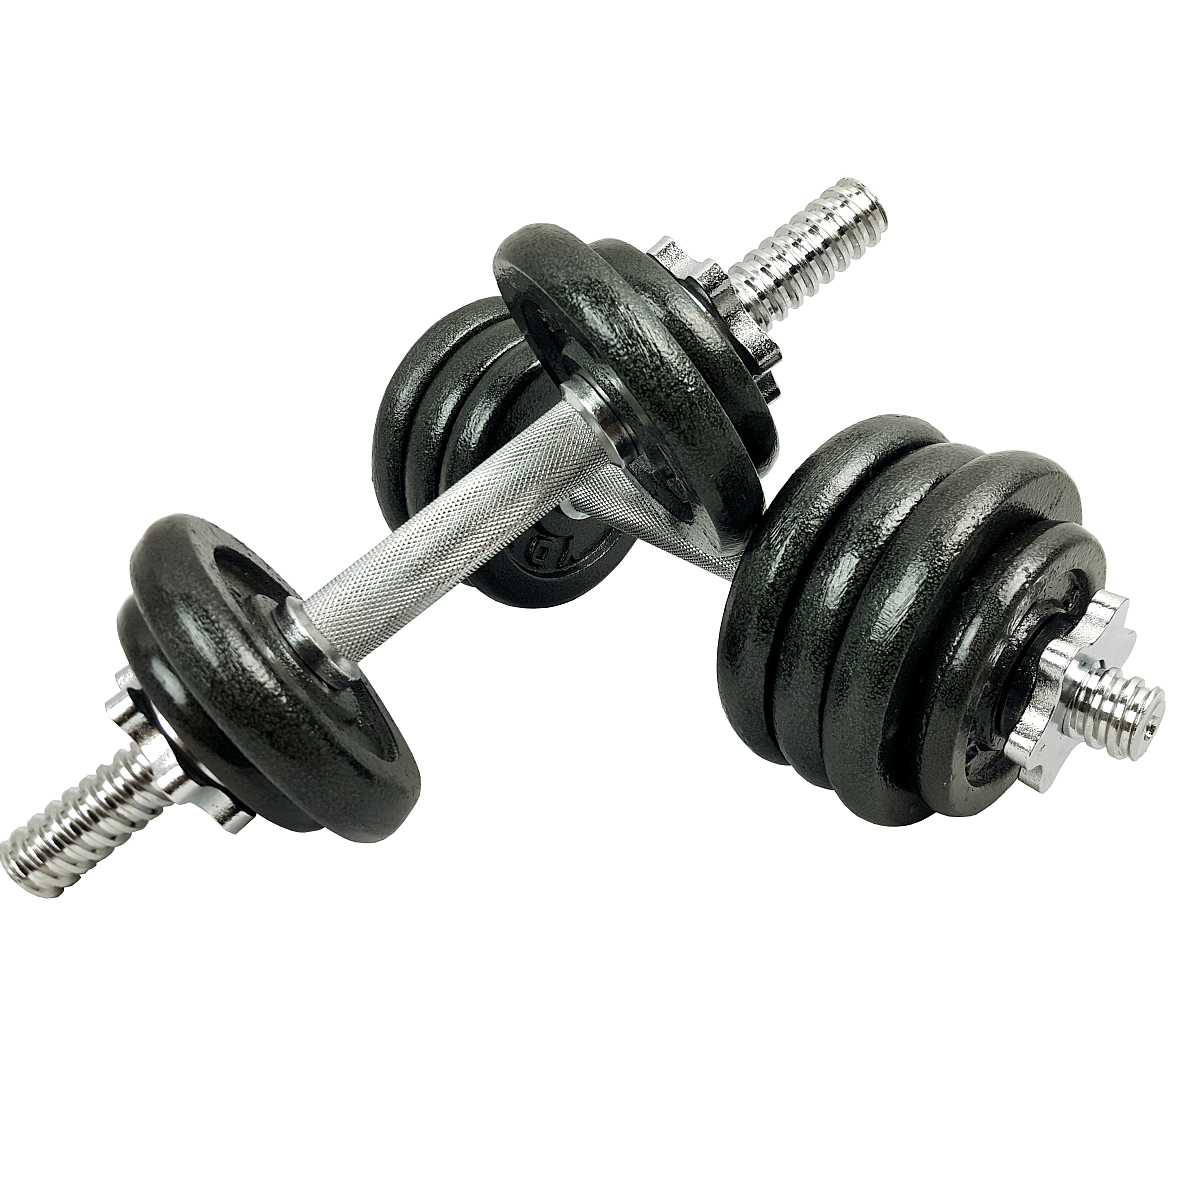 15 Kg Dumbbell Set With Case 2 The Fitness 15 Kg Cast Iron Dumbbell Set Is Designed For Home Toning And Strength Workout Usage. The Traditional 1&Quot; Standard Cast Plate Design Is Easy To Pick Up And Load Onto The Bars With The Quality Spinlock Collars Ensuring A Safe And Secure Fit On The Bar, Along With Quick Plate Changes. The Knurled Black Dumbbell Sleeves Ensures A Great Grip Whilst Working Out. The Dumbbell Set Can Be Used For A Wide Range Of Exercises To Help Pump Your Muscles And Tone Your Arms. The Set Lets You Adjust The Lifting Weight Up To A Maximum Of Two 7.5 Kg Dumbbells. Dumbbell Set 15 Kg With Packing Case